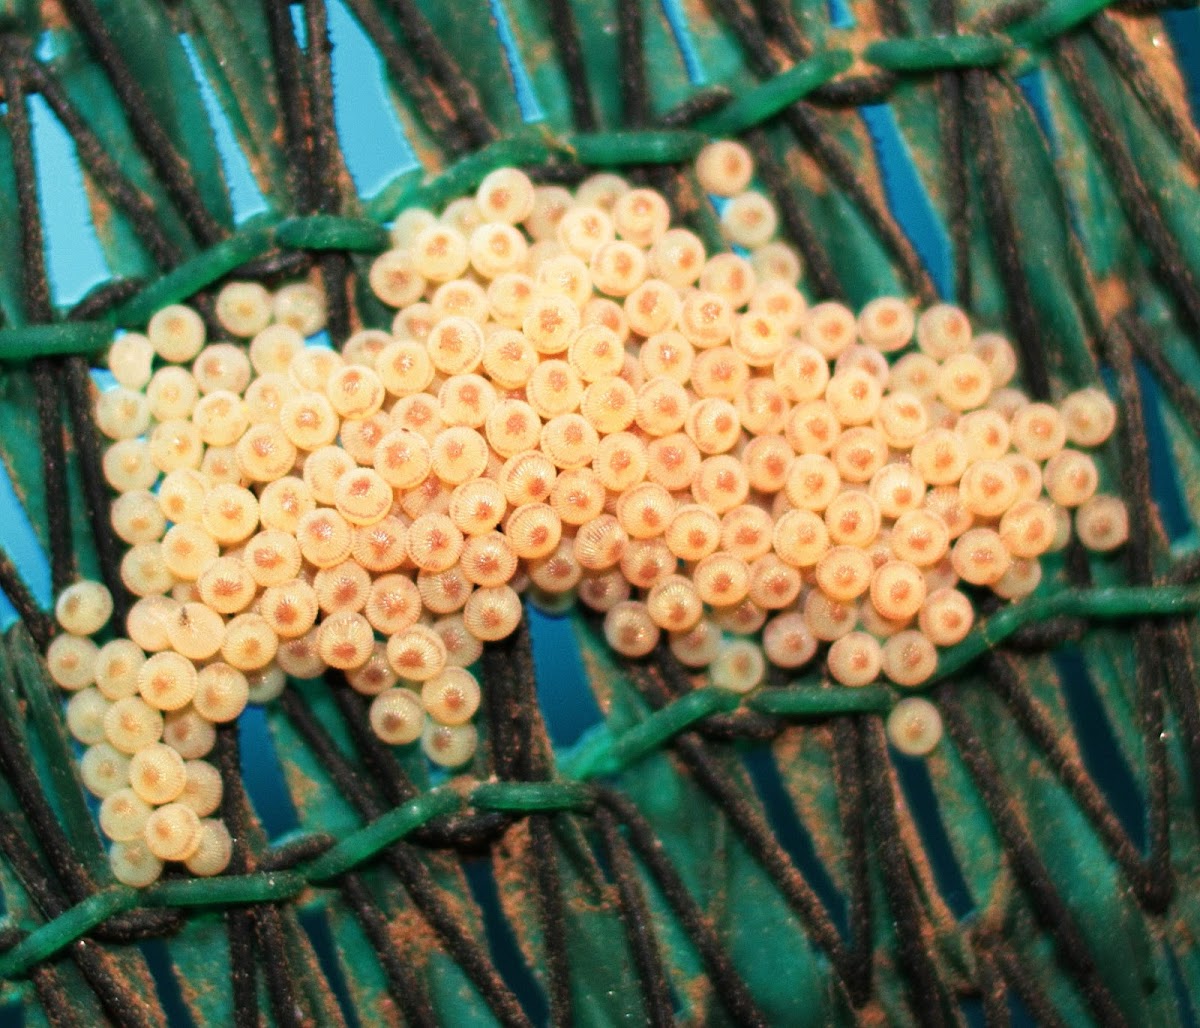 Moth or Butterfly eggs